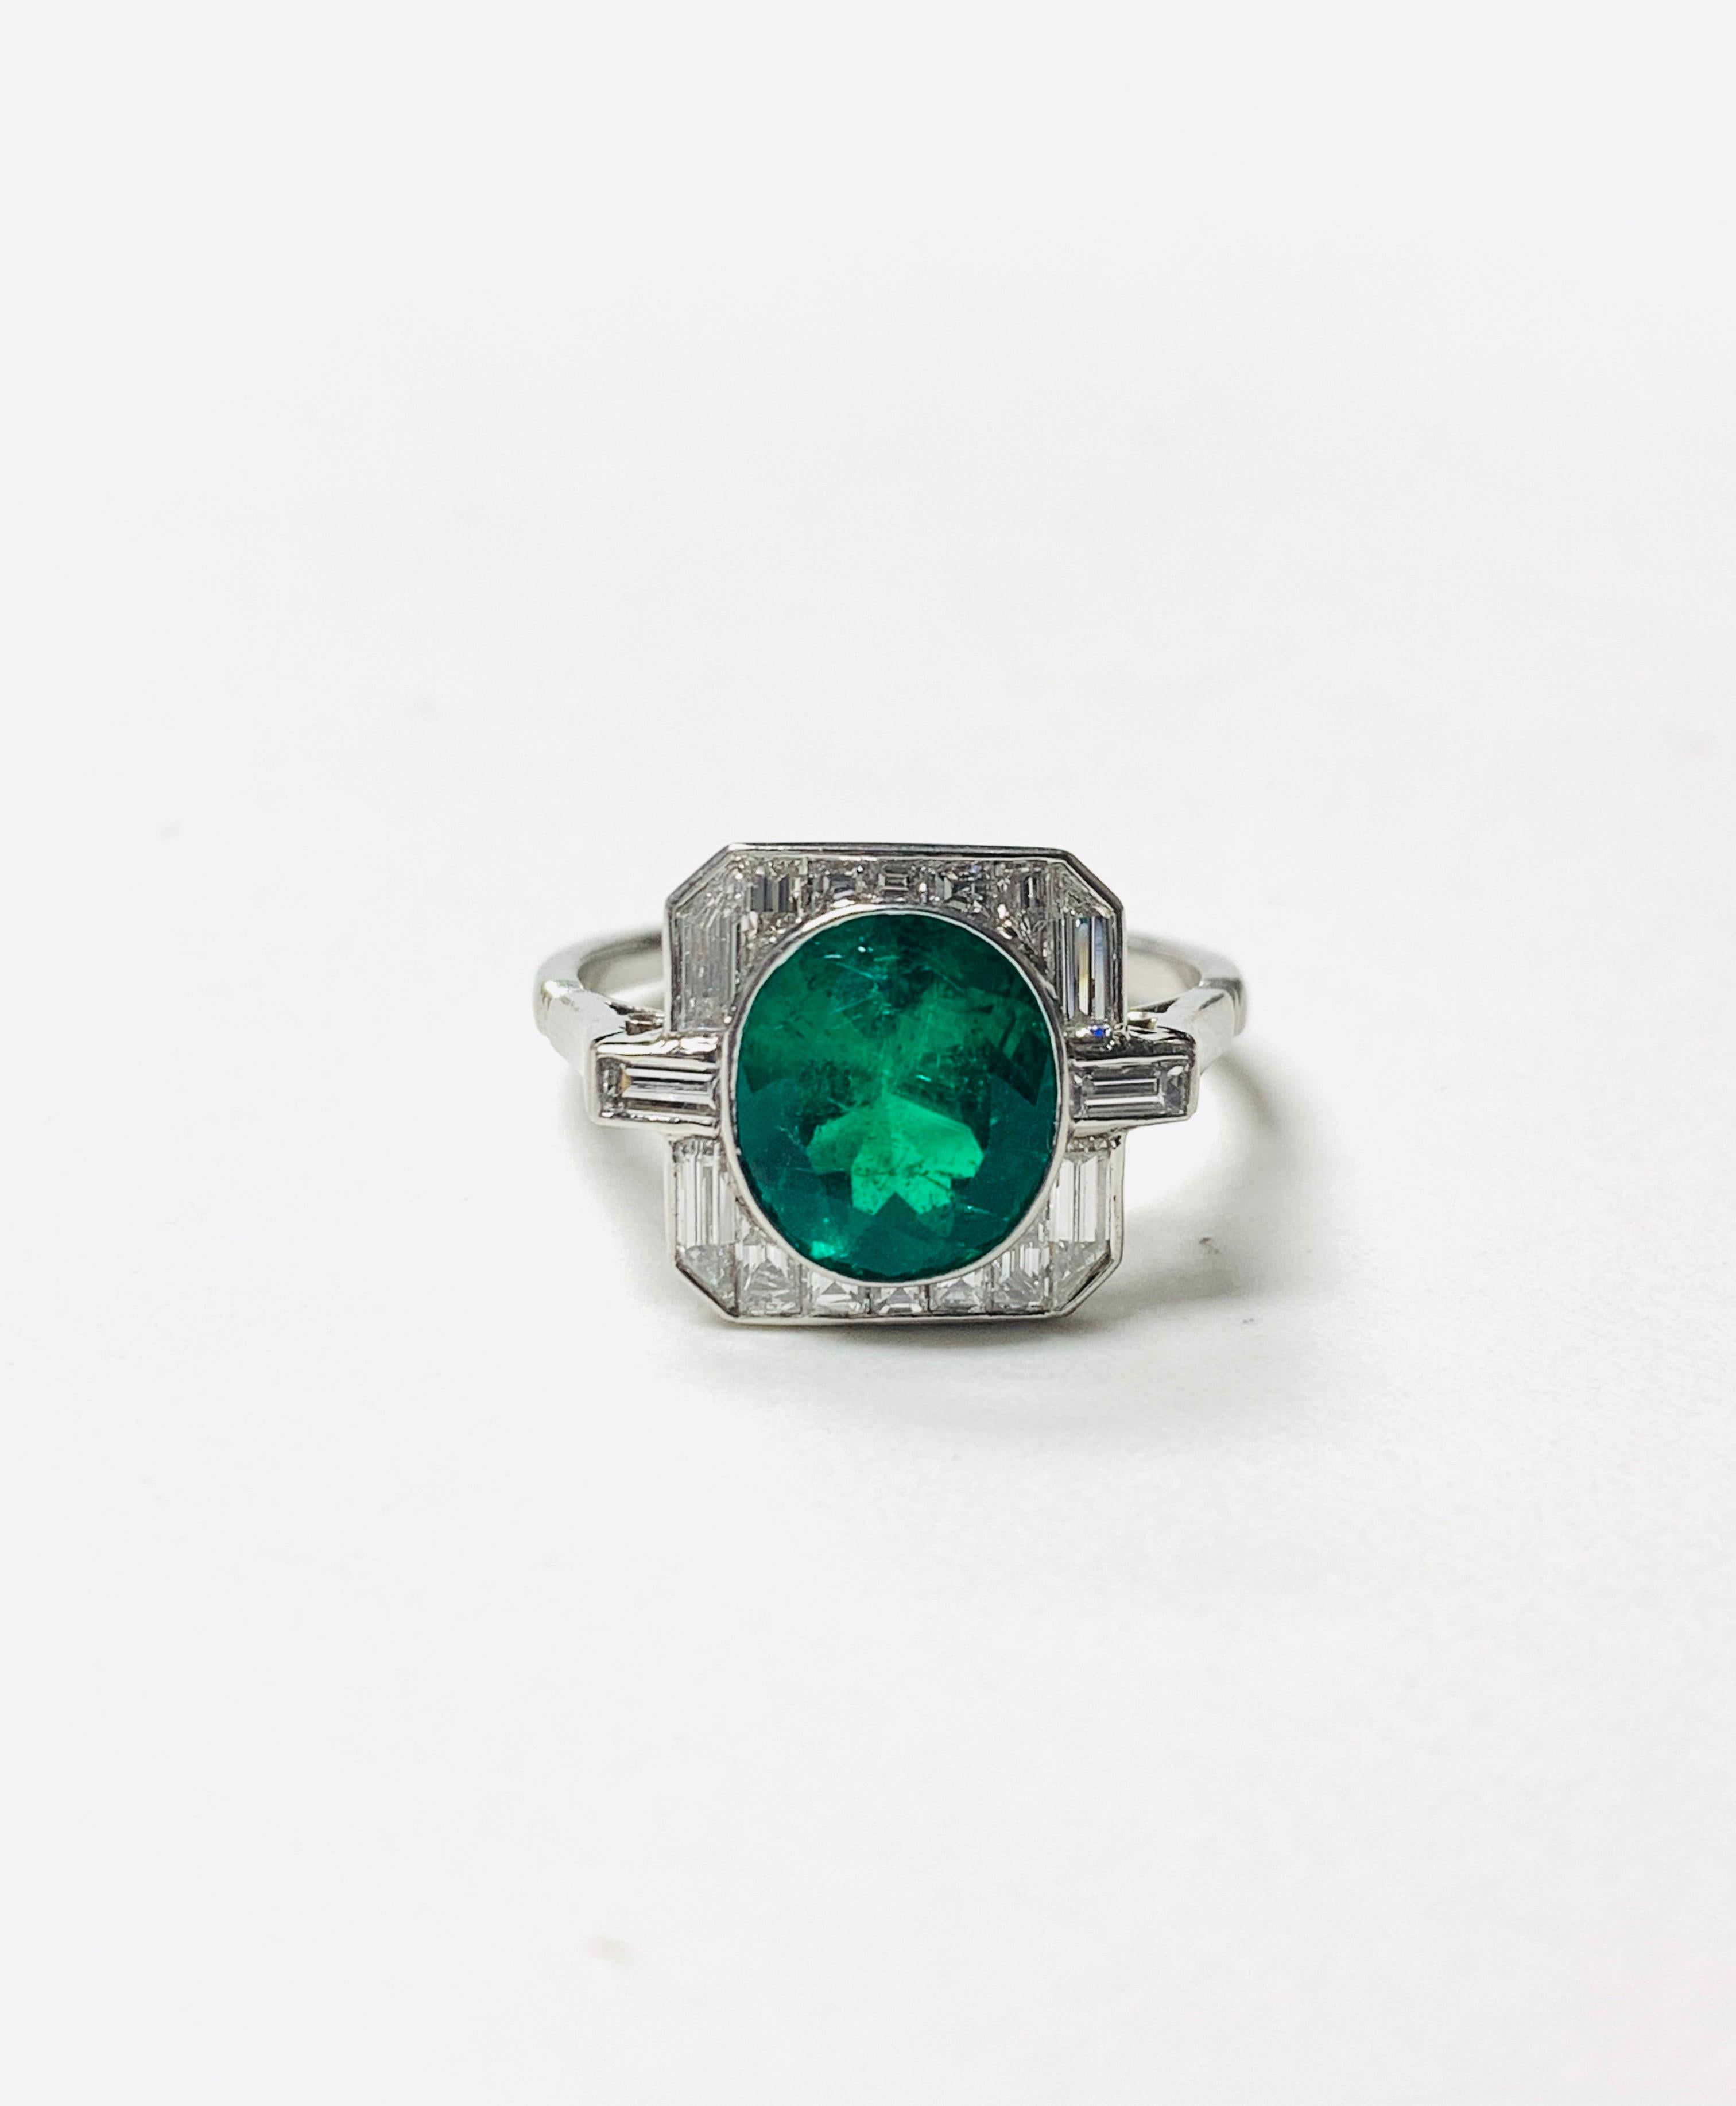 This gorgeous emerald and diamond engagement ring is handmade in platinum. 
The details are as follows: 
Emerald weight : 1.90 carat ( Zambia origin )
Diamond weight : 1 carat ( GH color and VS clarity ) 
Metal : Platinum 
Ring size : 6 1/4